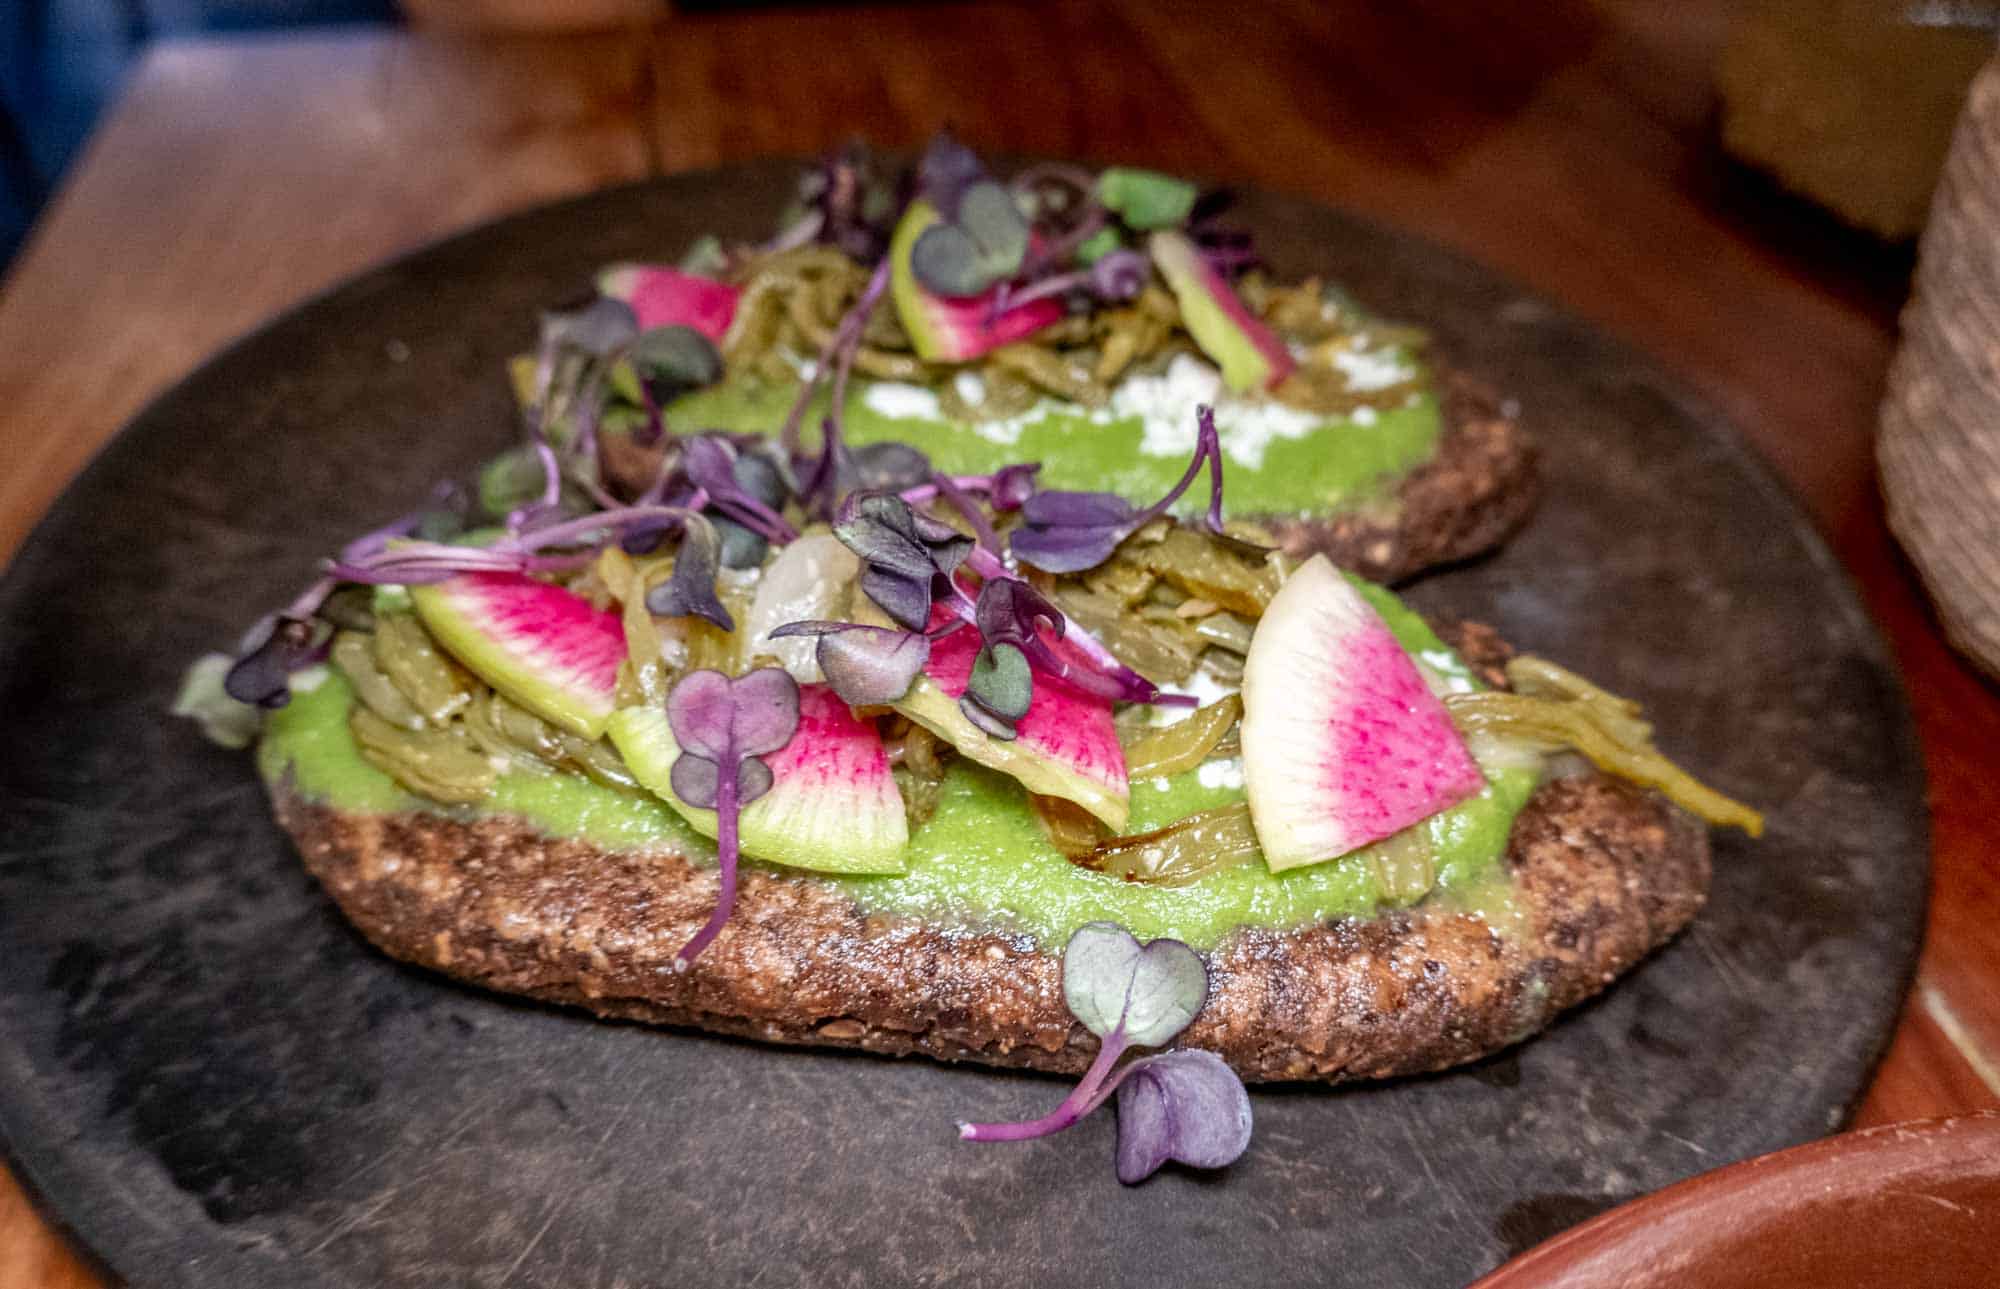 Blue corn masa cakes are stuffed with refried beans, queso fresco, nopales, and then topped with salsa verde and radishes